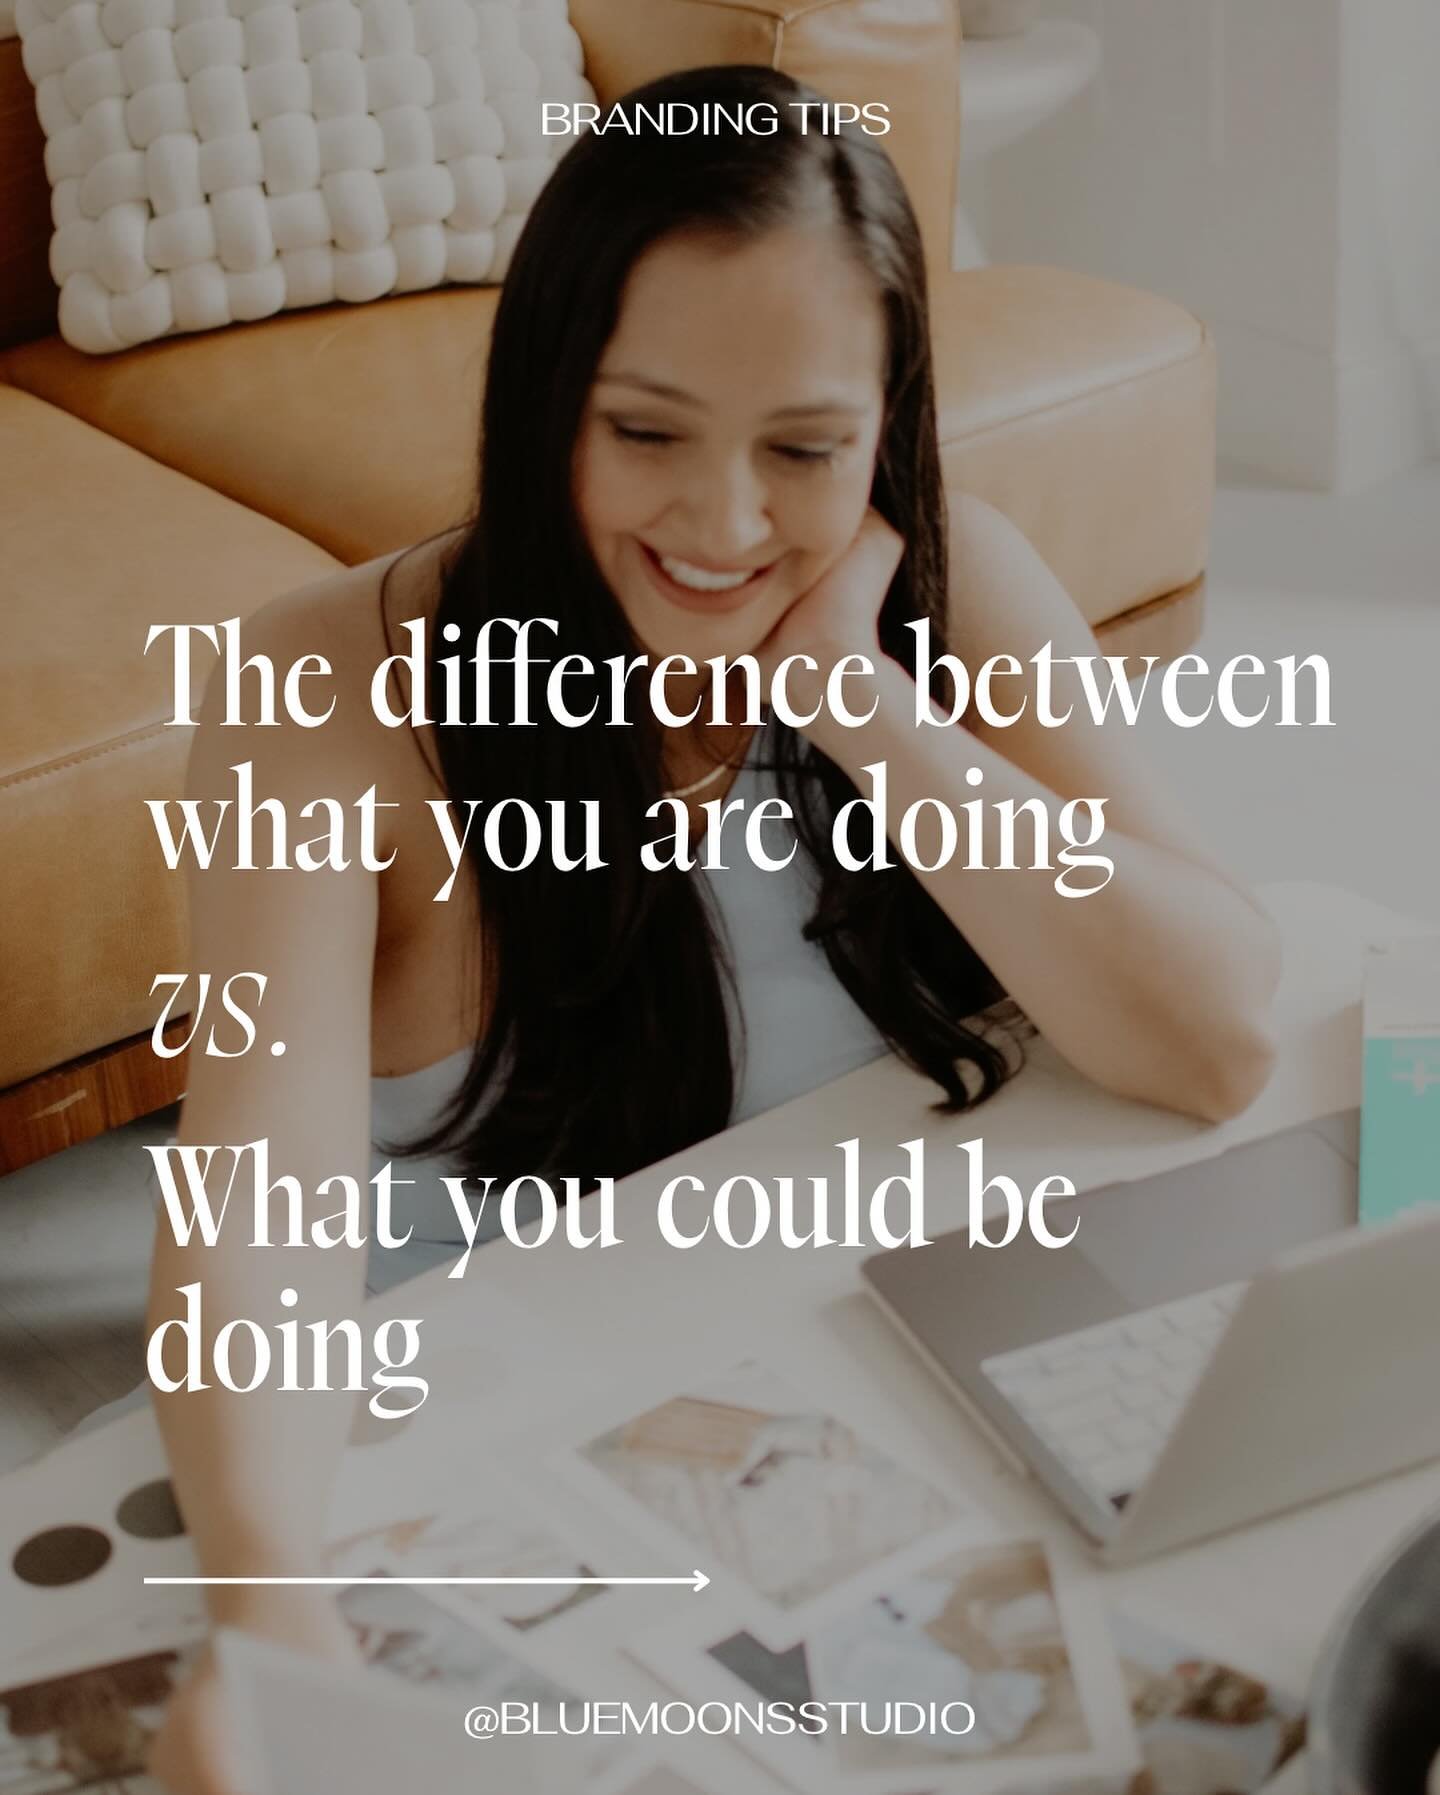 ✨&nbsp;The difference between what you are doing vs what you could be doing ✨

You&rsquo;re spending a lot of time reading blogs and watching youtube videos on how to DIY your brand and website, not to mention all the workbooks you&rsquo;ve downloade